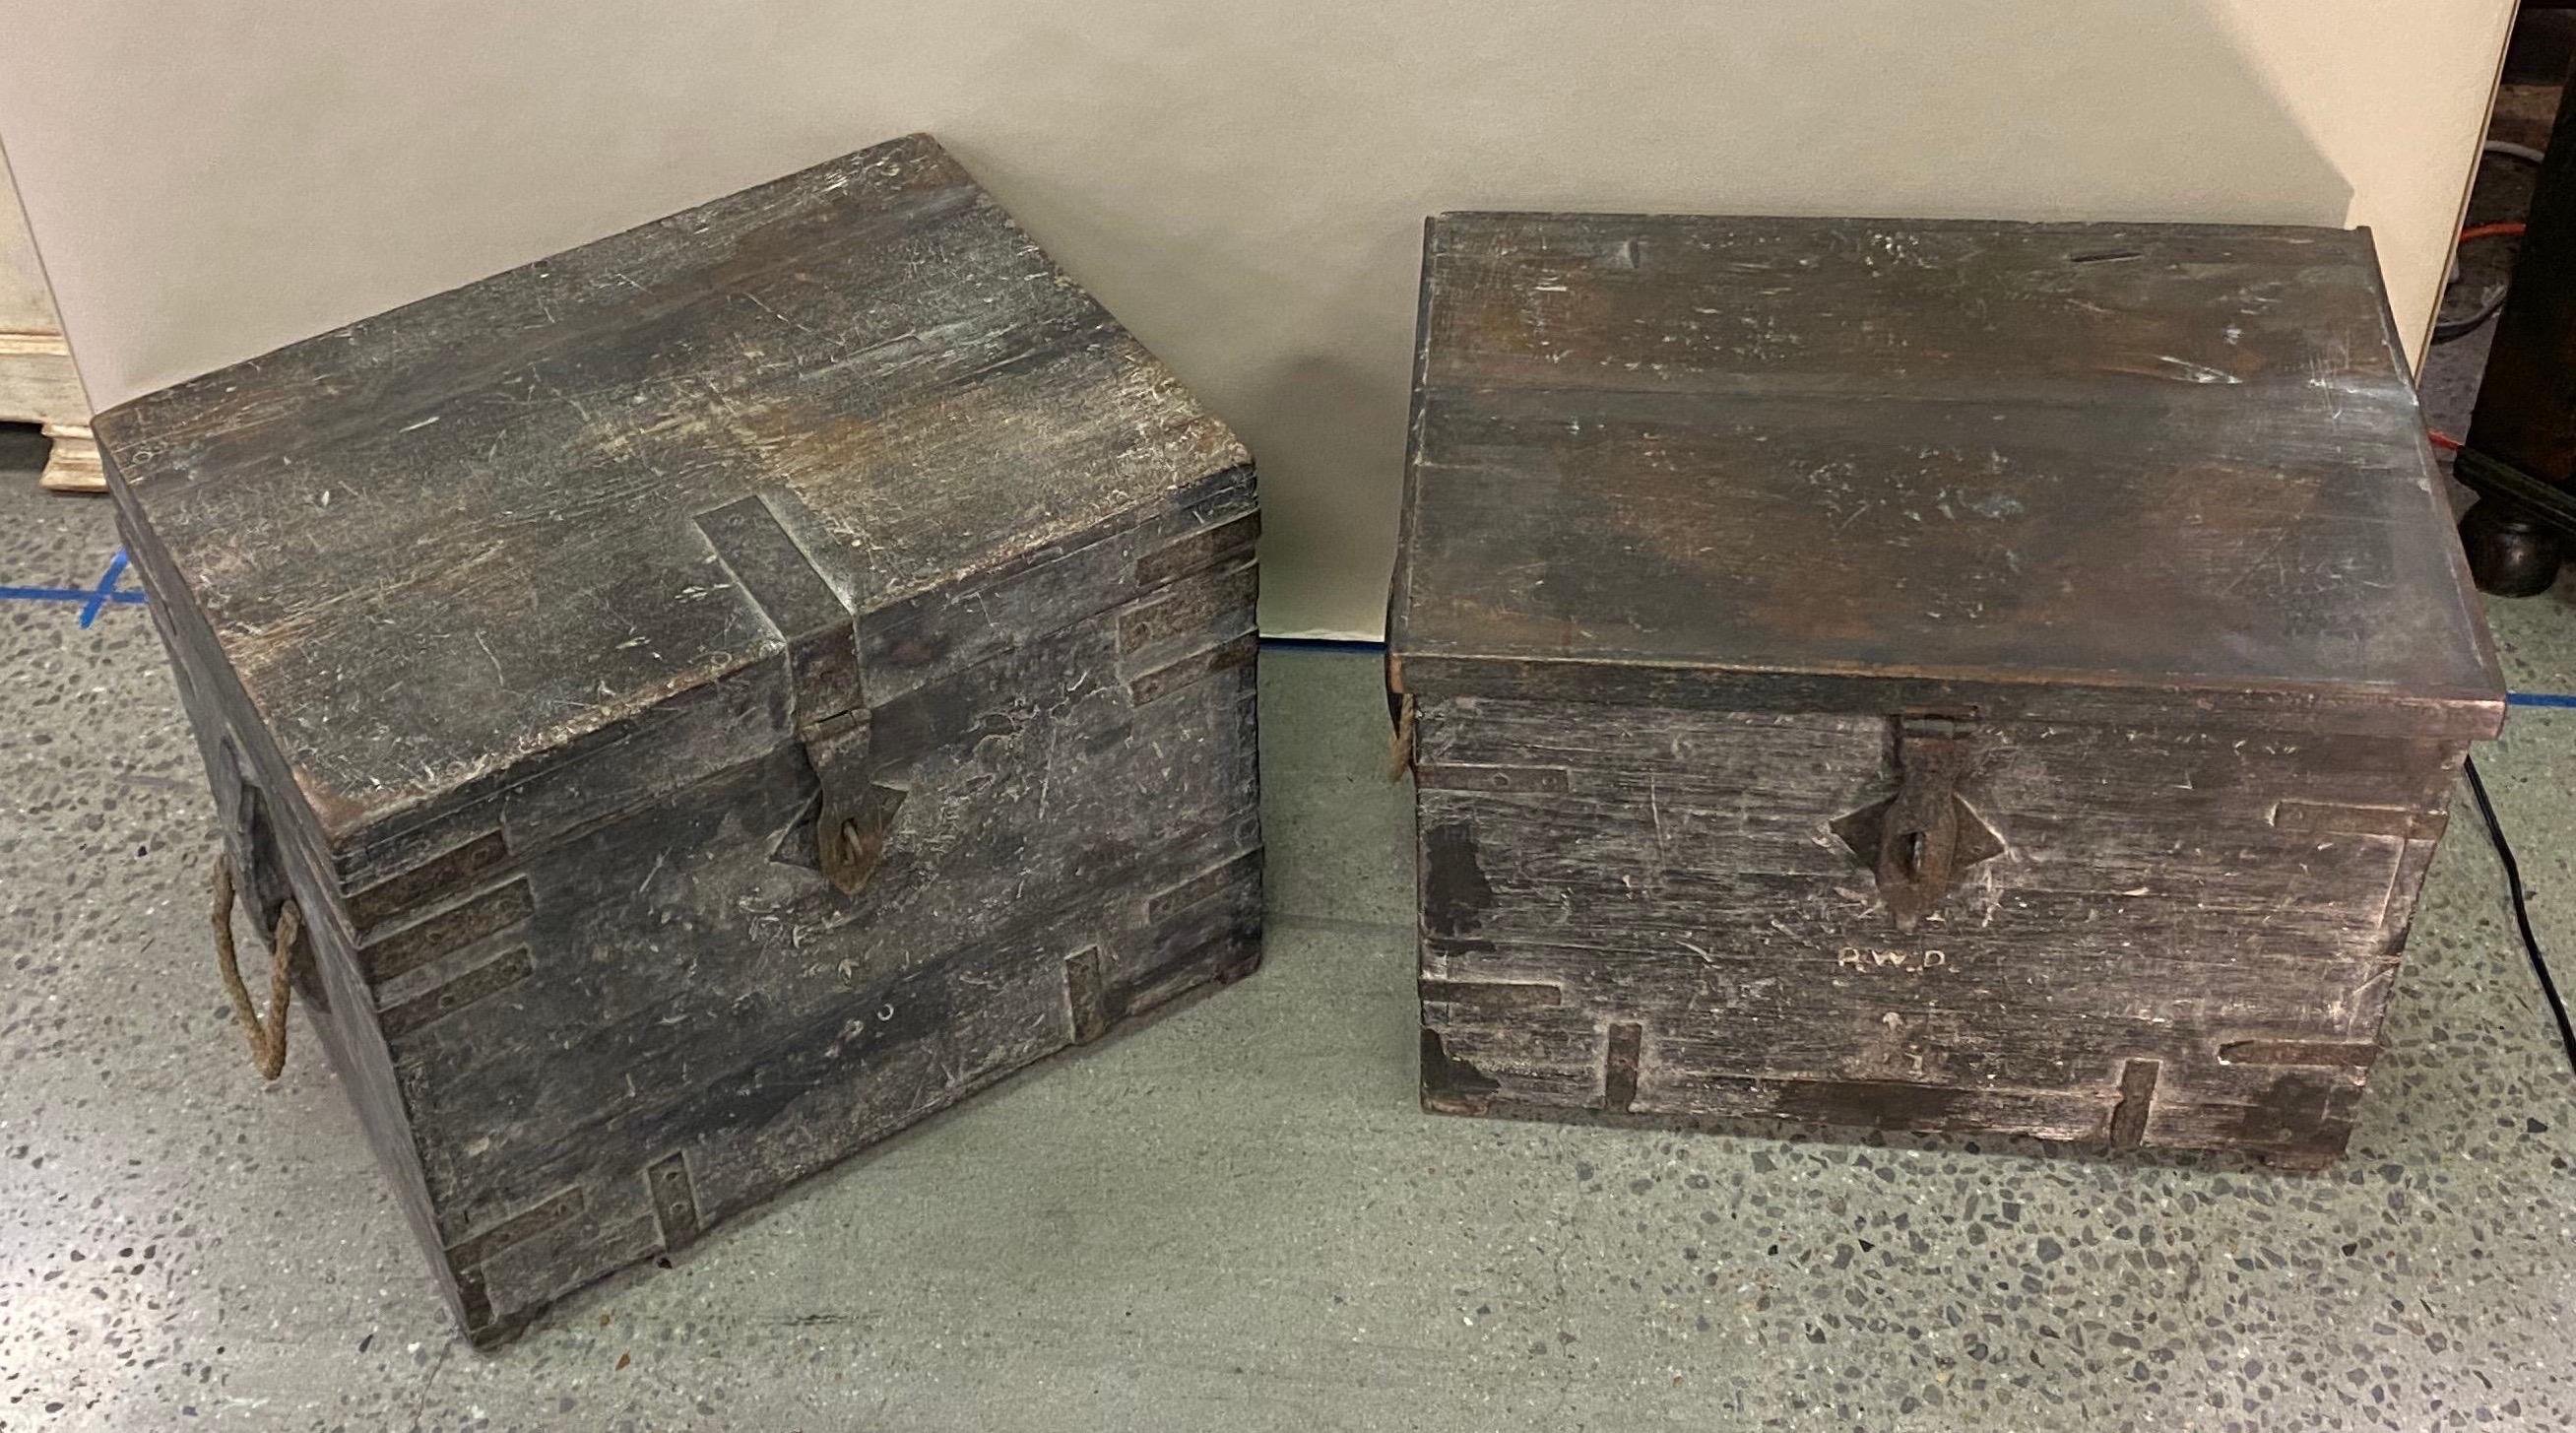 Near pair of 19th century British colonial teak munitions trunks used as side tables. About an inch difference in the two- not really noticeable unless right next to each other. Could very easily be altered to measure the same height. 

One